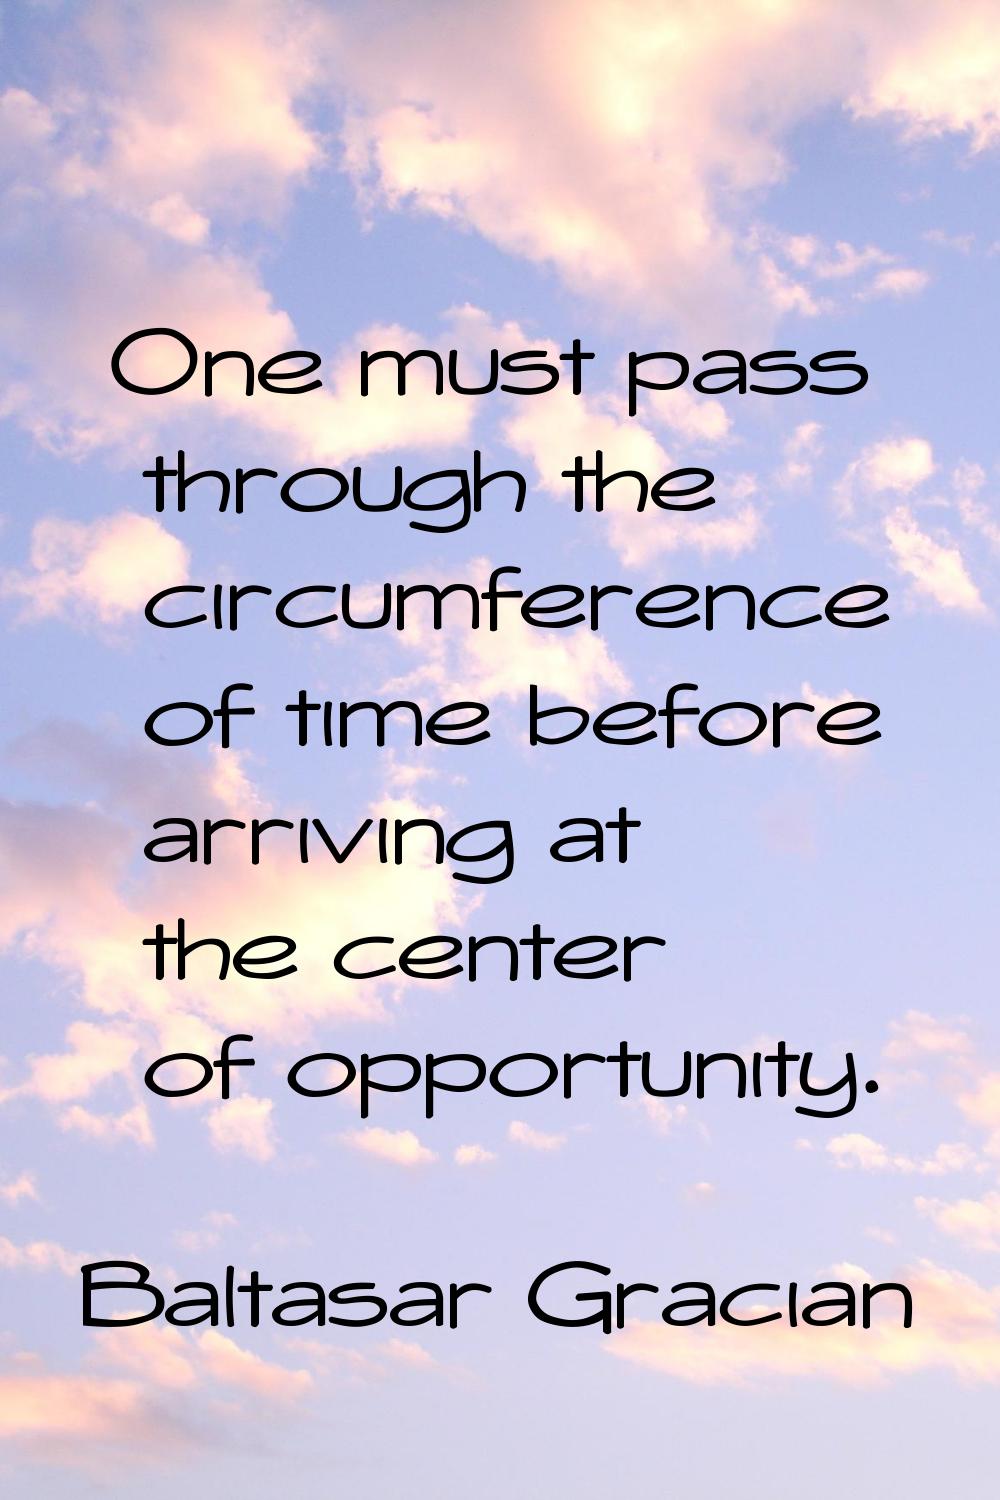 One must pass through the circumference of time before arriving at the center of opportunity.